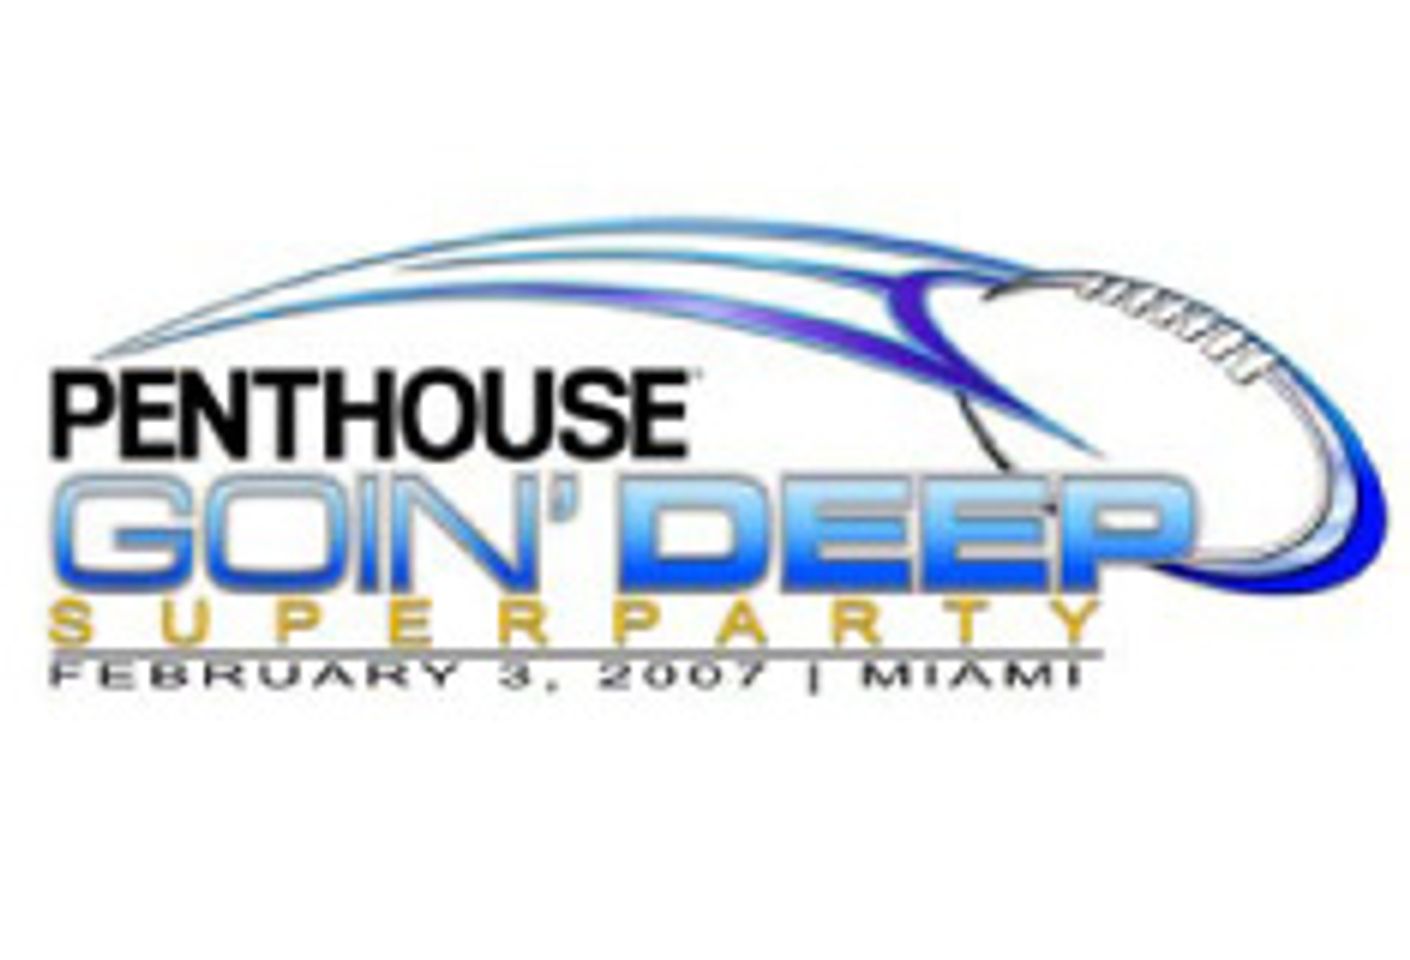 Penthouse to Throw Super Bowl Bash